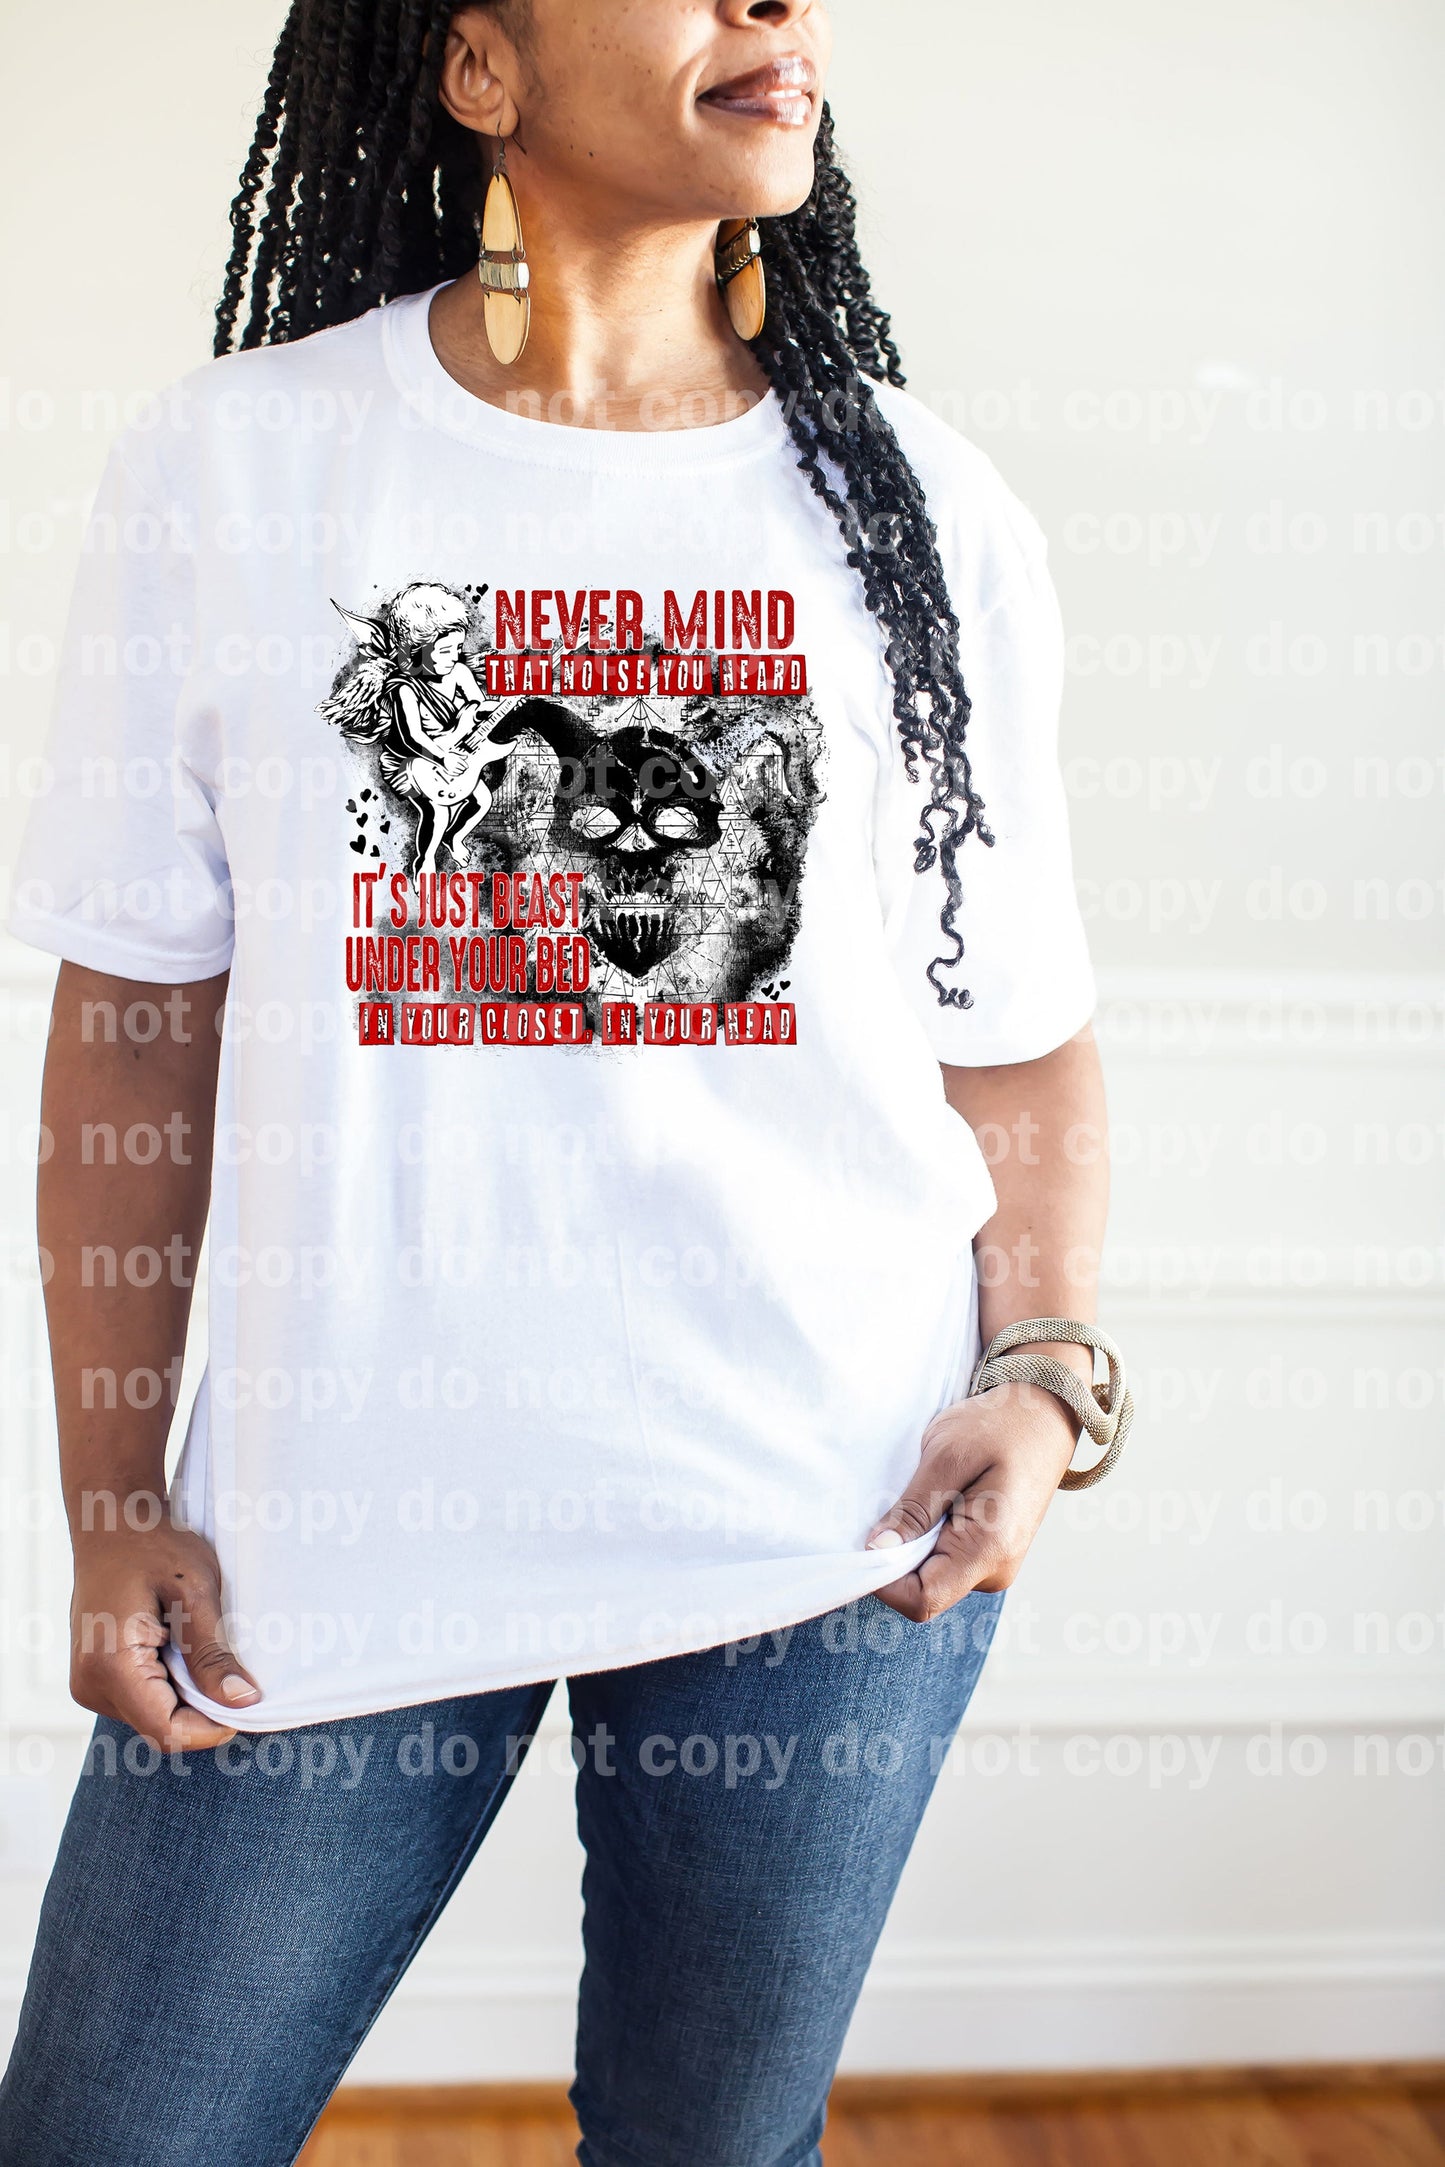 Never Mind That Noise You Heard Distressed Dream Print or Sublimation Print